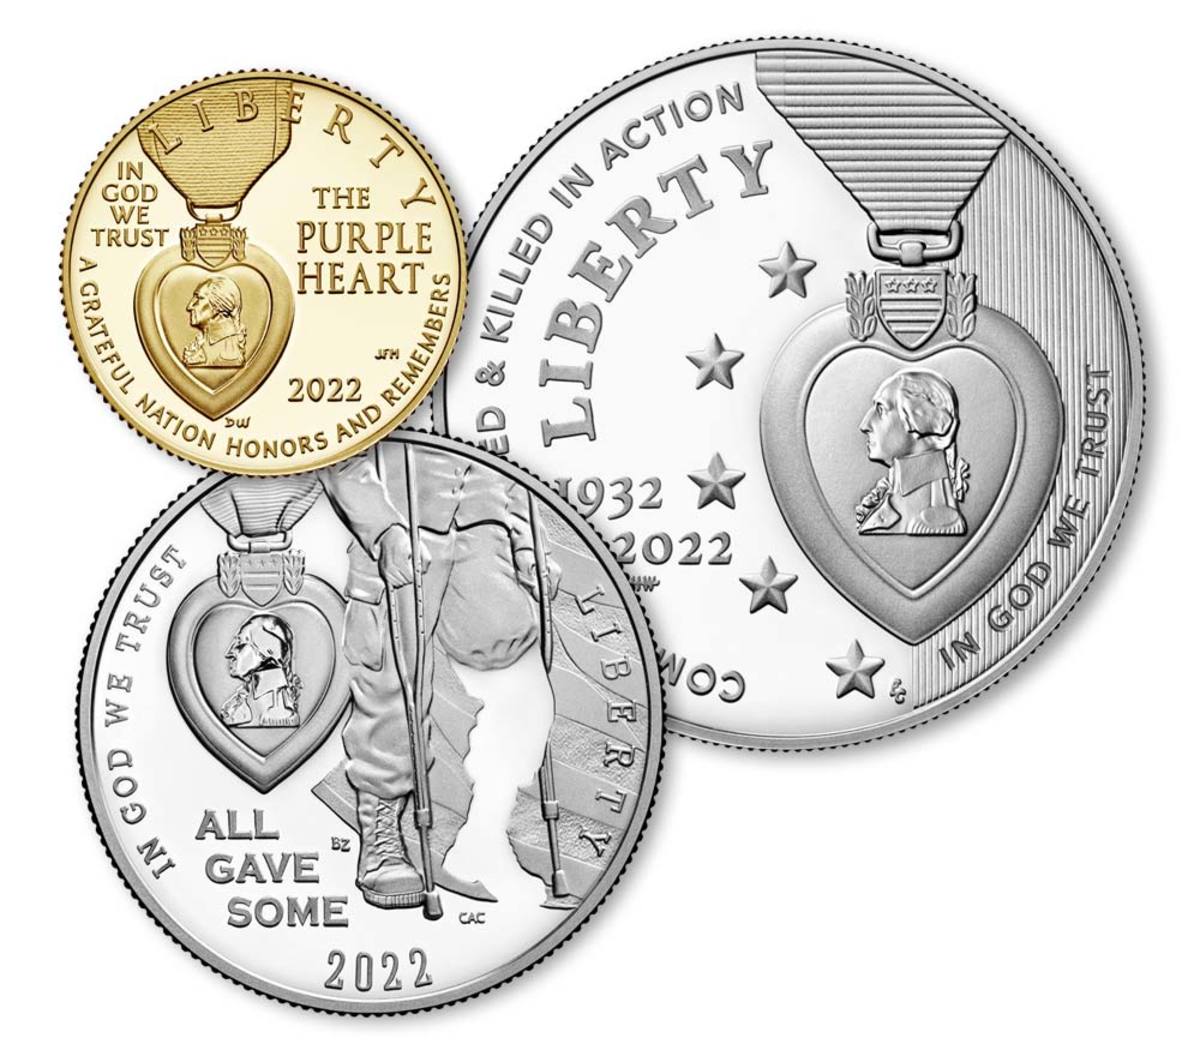 $5 gold, silver dollar, and half dollar proof coins that make up the National Purple Heart Hall of Honor 3-coin set. (Images courtesy United States Mint.)